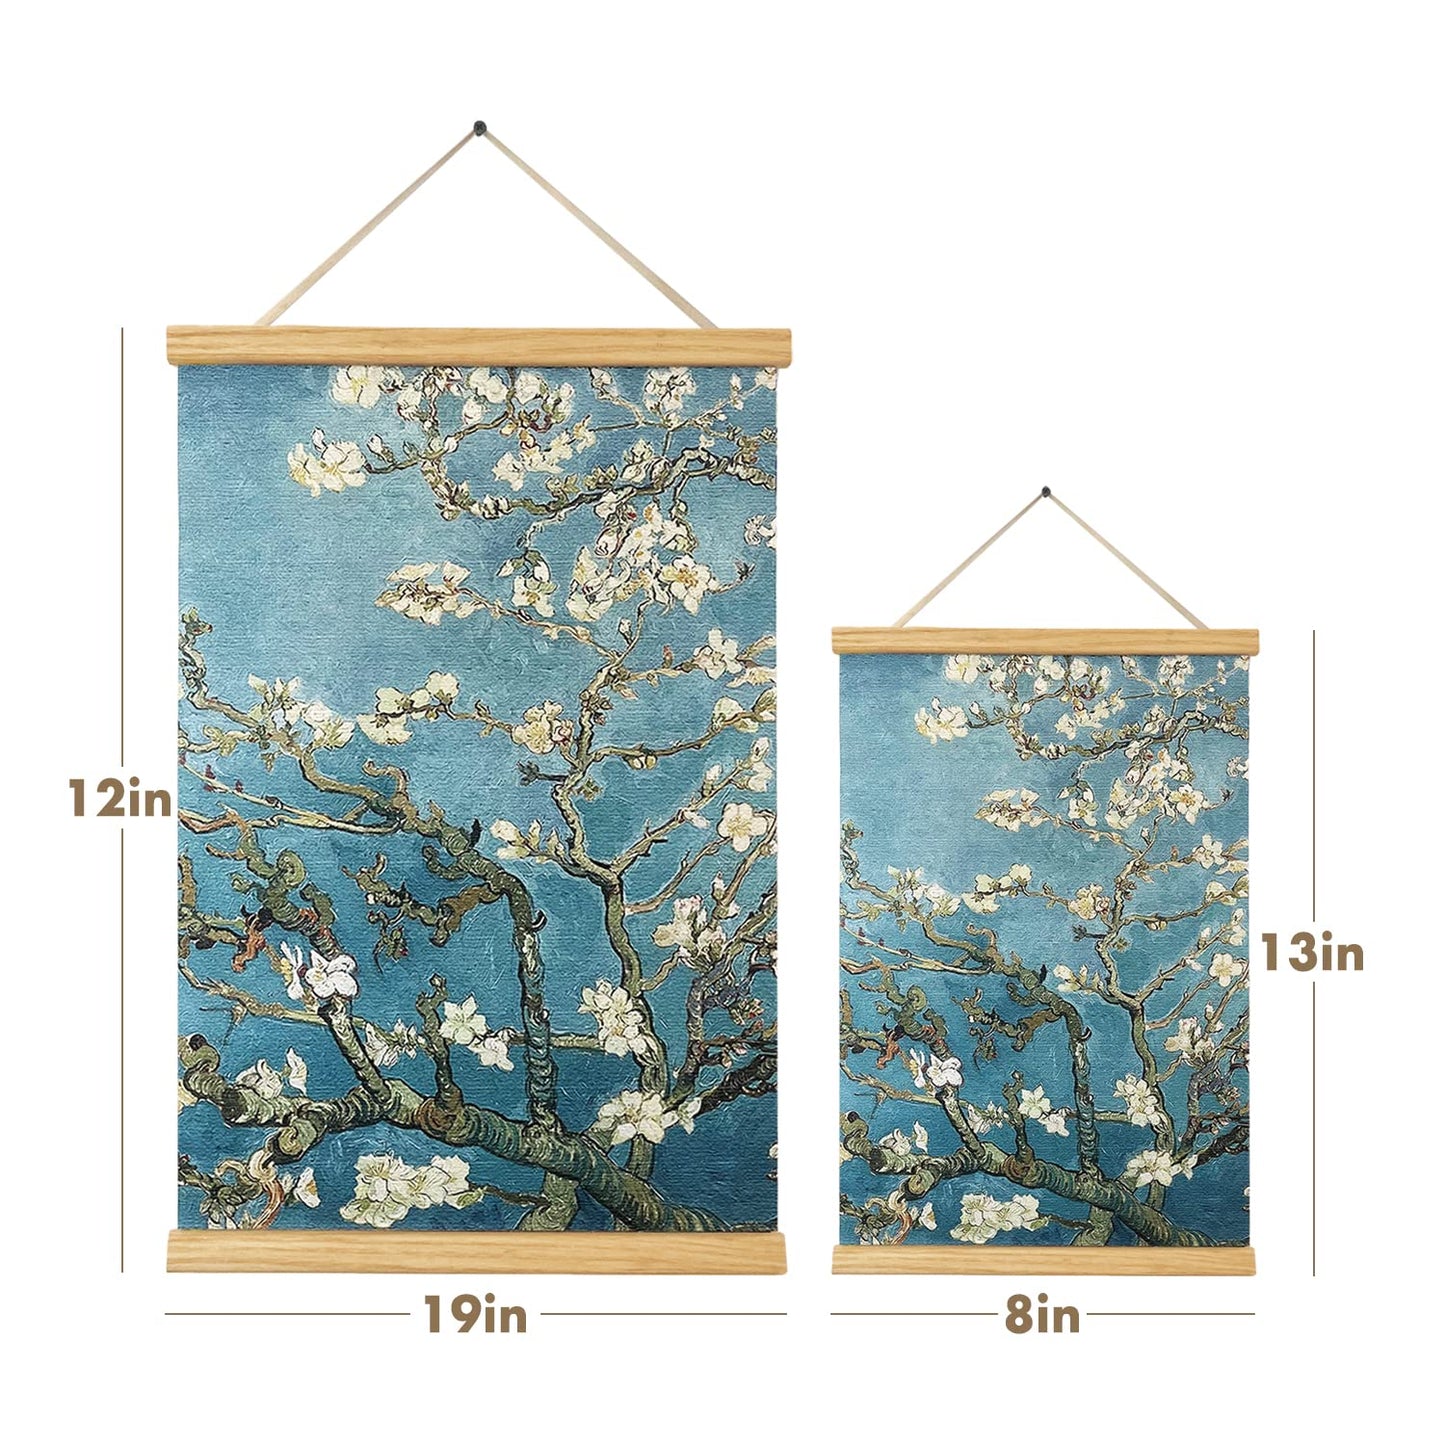 THVANART Van Gogh Canvas Wall Art Posters and Prints Almond Blossom Framed Oak Wood Scroll Hang Wall Decor for Living Room Bedroom Home Office Decorations (Almond Blossom, 8x13inch（20x33cm）)